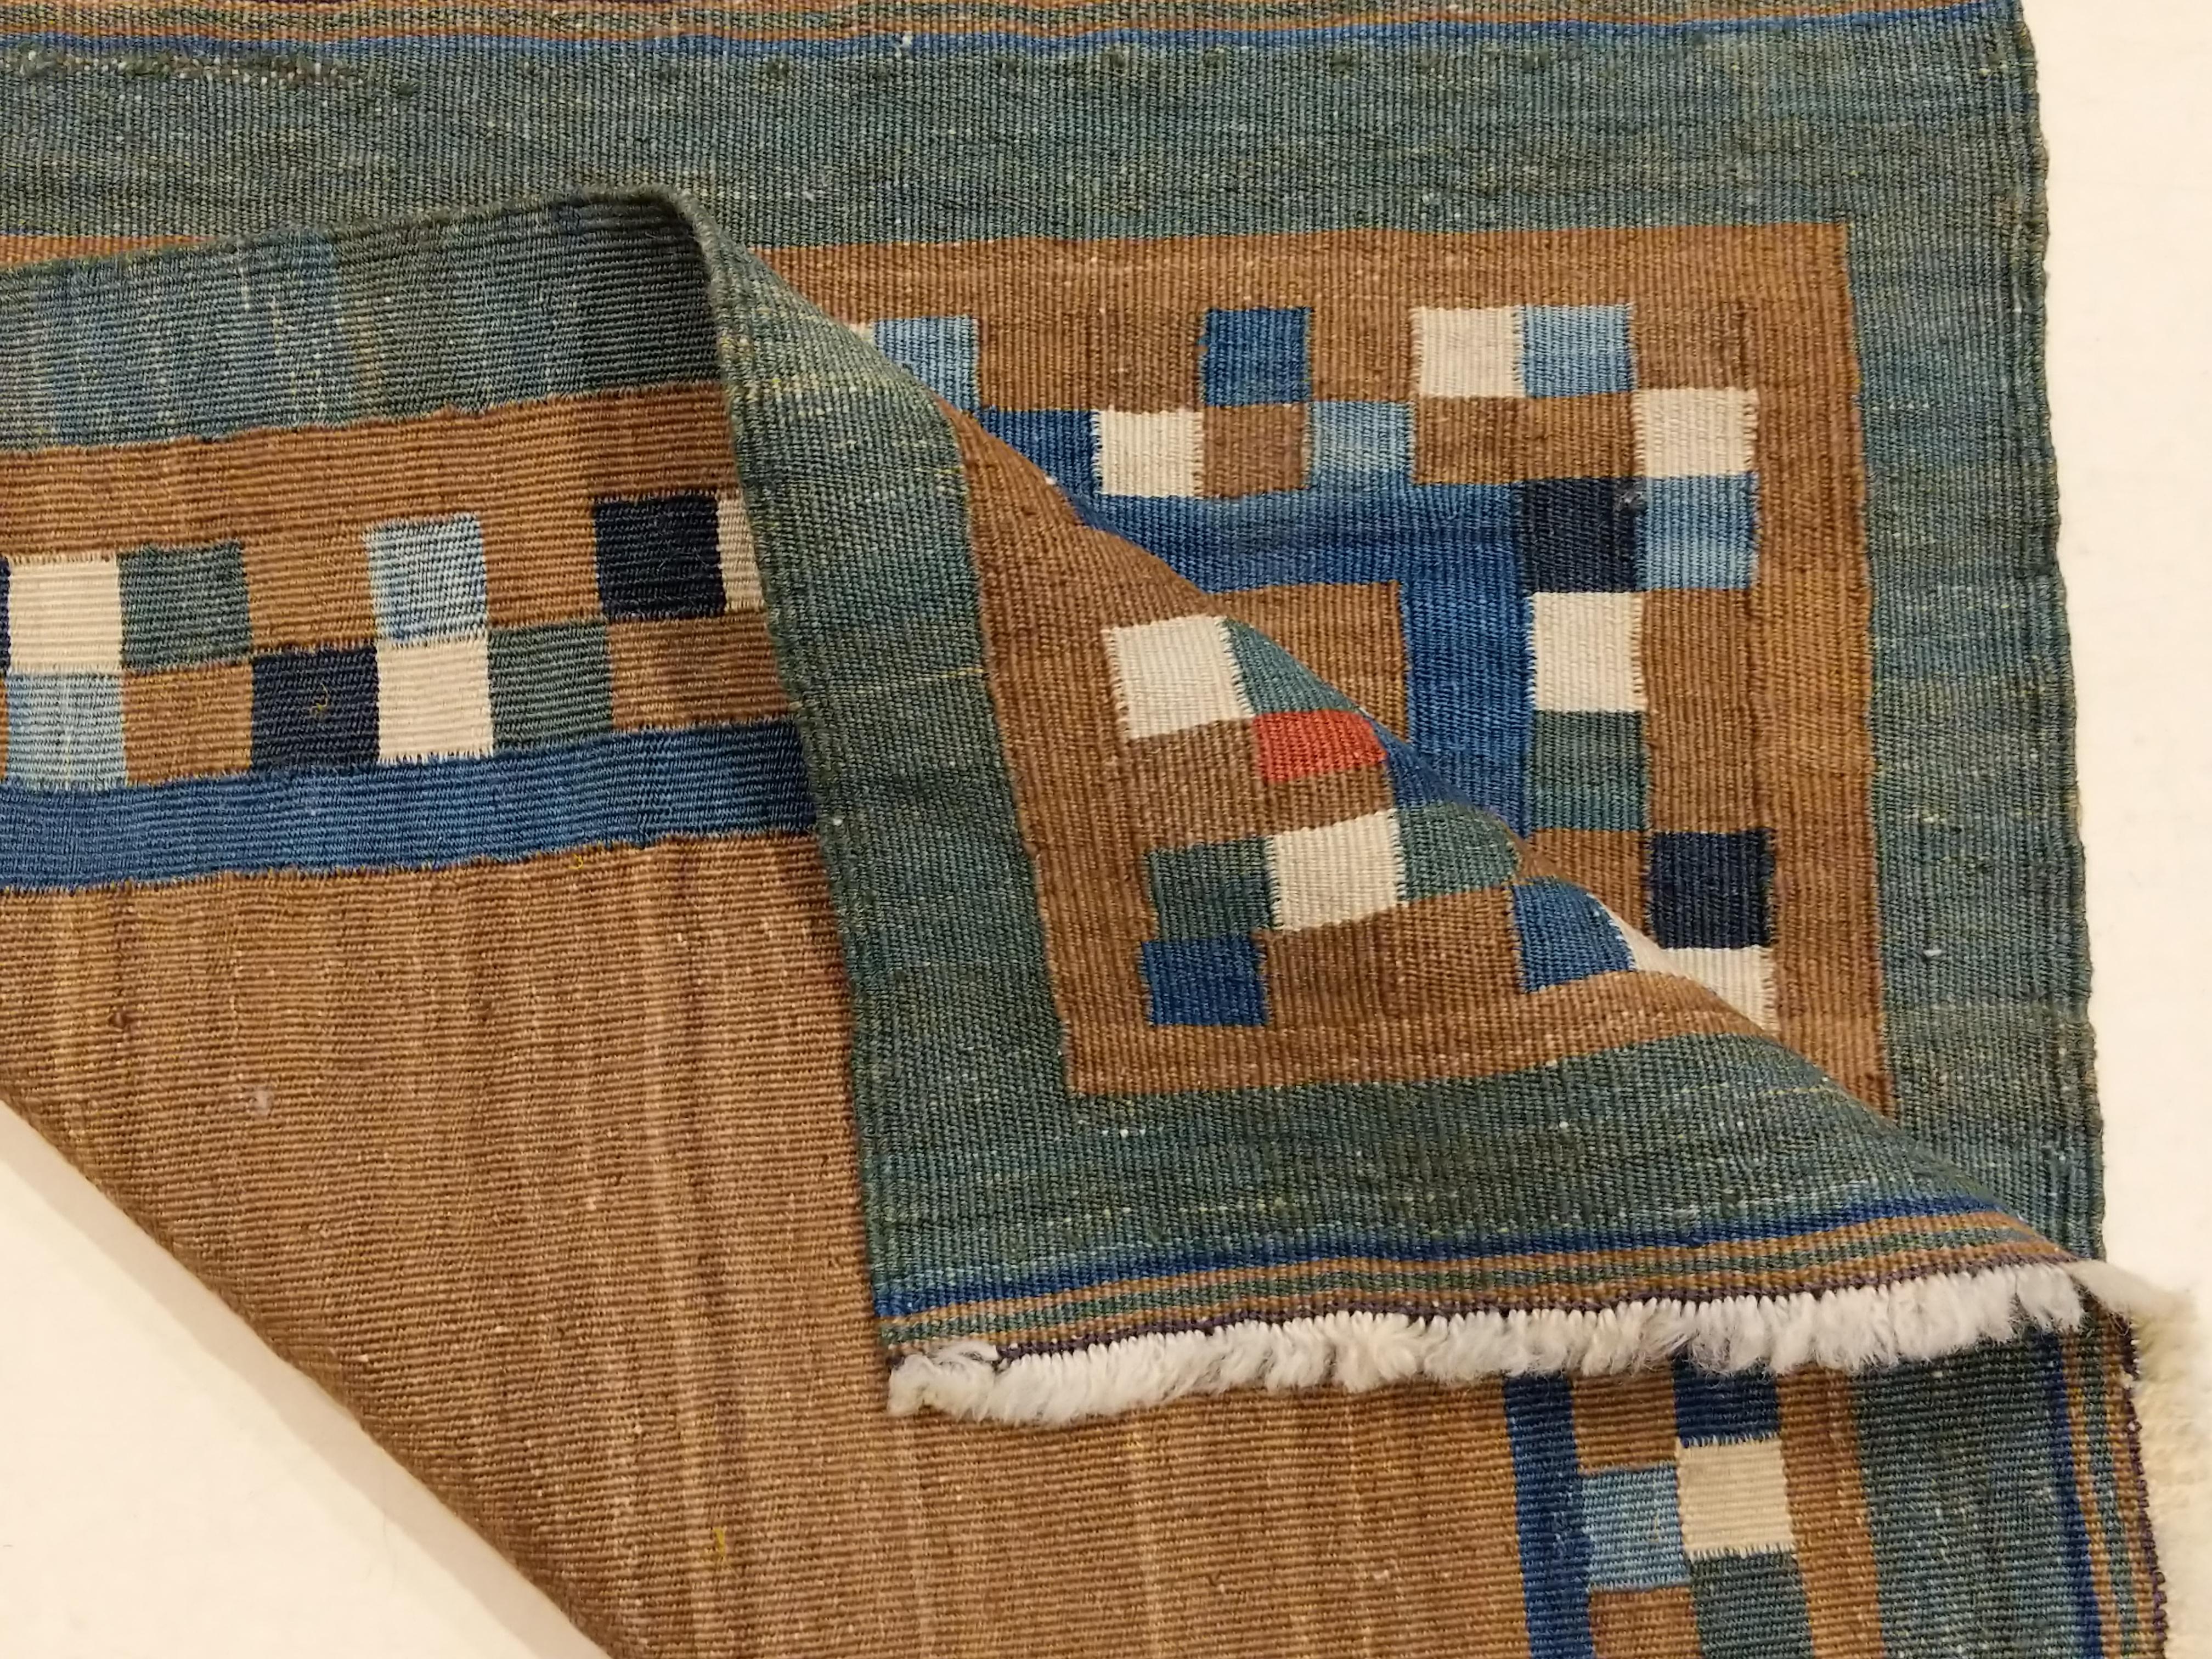 Hand-Woven Antique Miniature Modernist Tribal Camel Wool Sofreh Rug